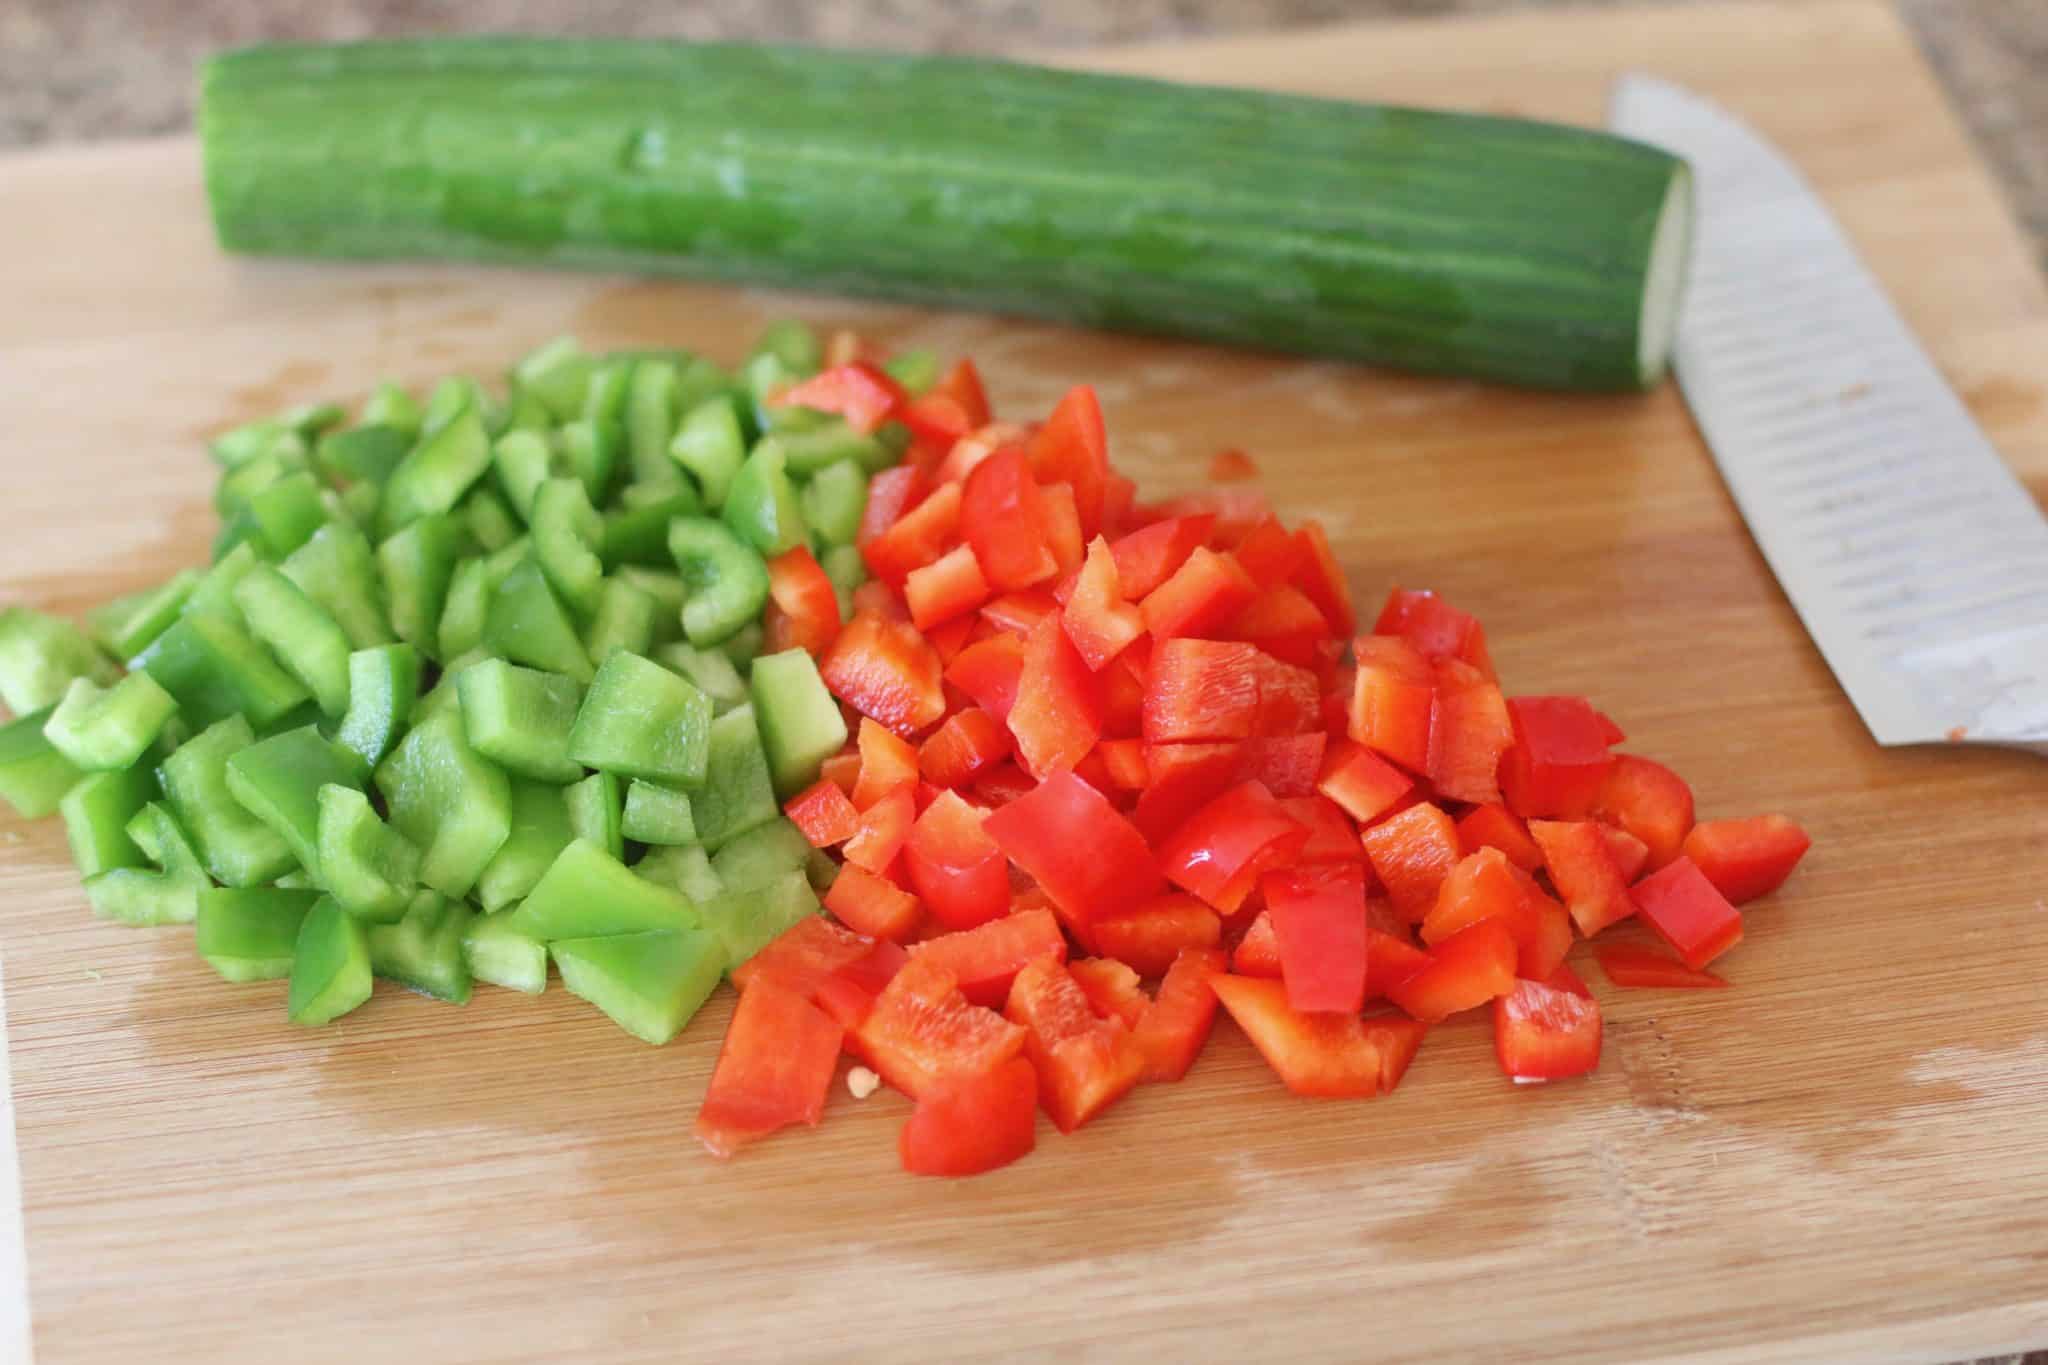 diced cucumbers, green peppers, red pepper on wooden cutting board.